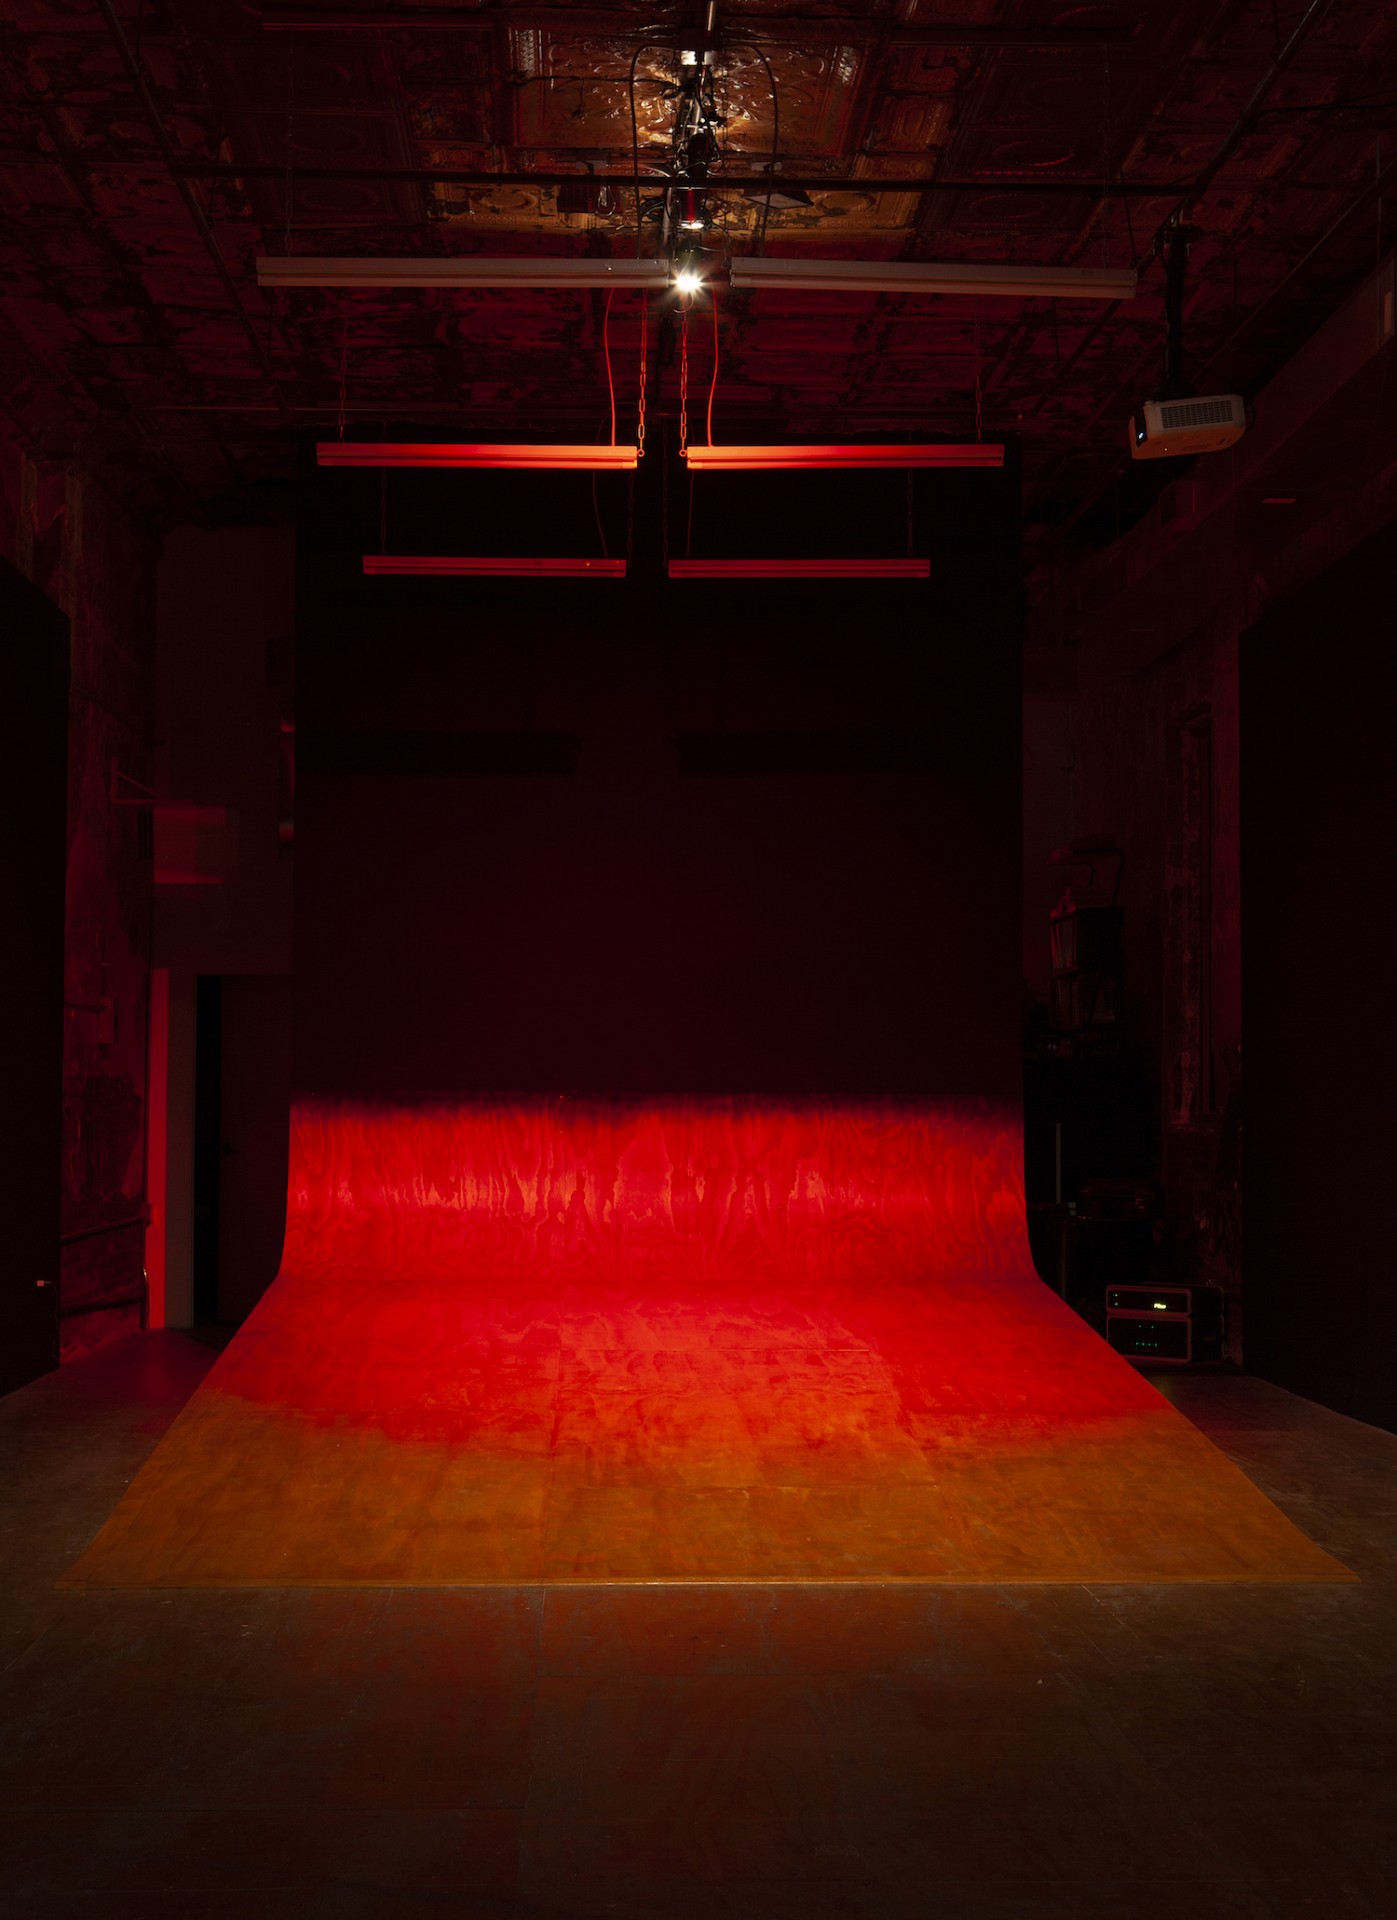 Constantina Zavitsanos, *Call to Post*, 2019. Infrasonic ramp: plywood, sound, transducers, wire. Installation view at Participant Inc, New York. Photo: Mark Waldhauser